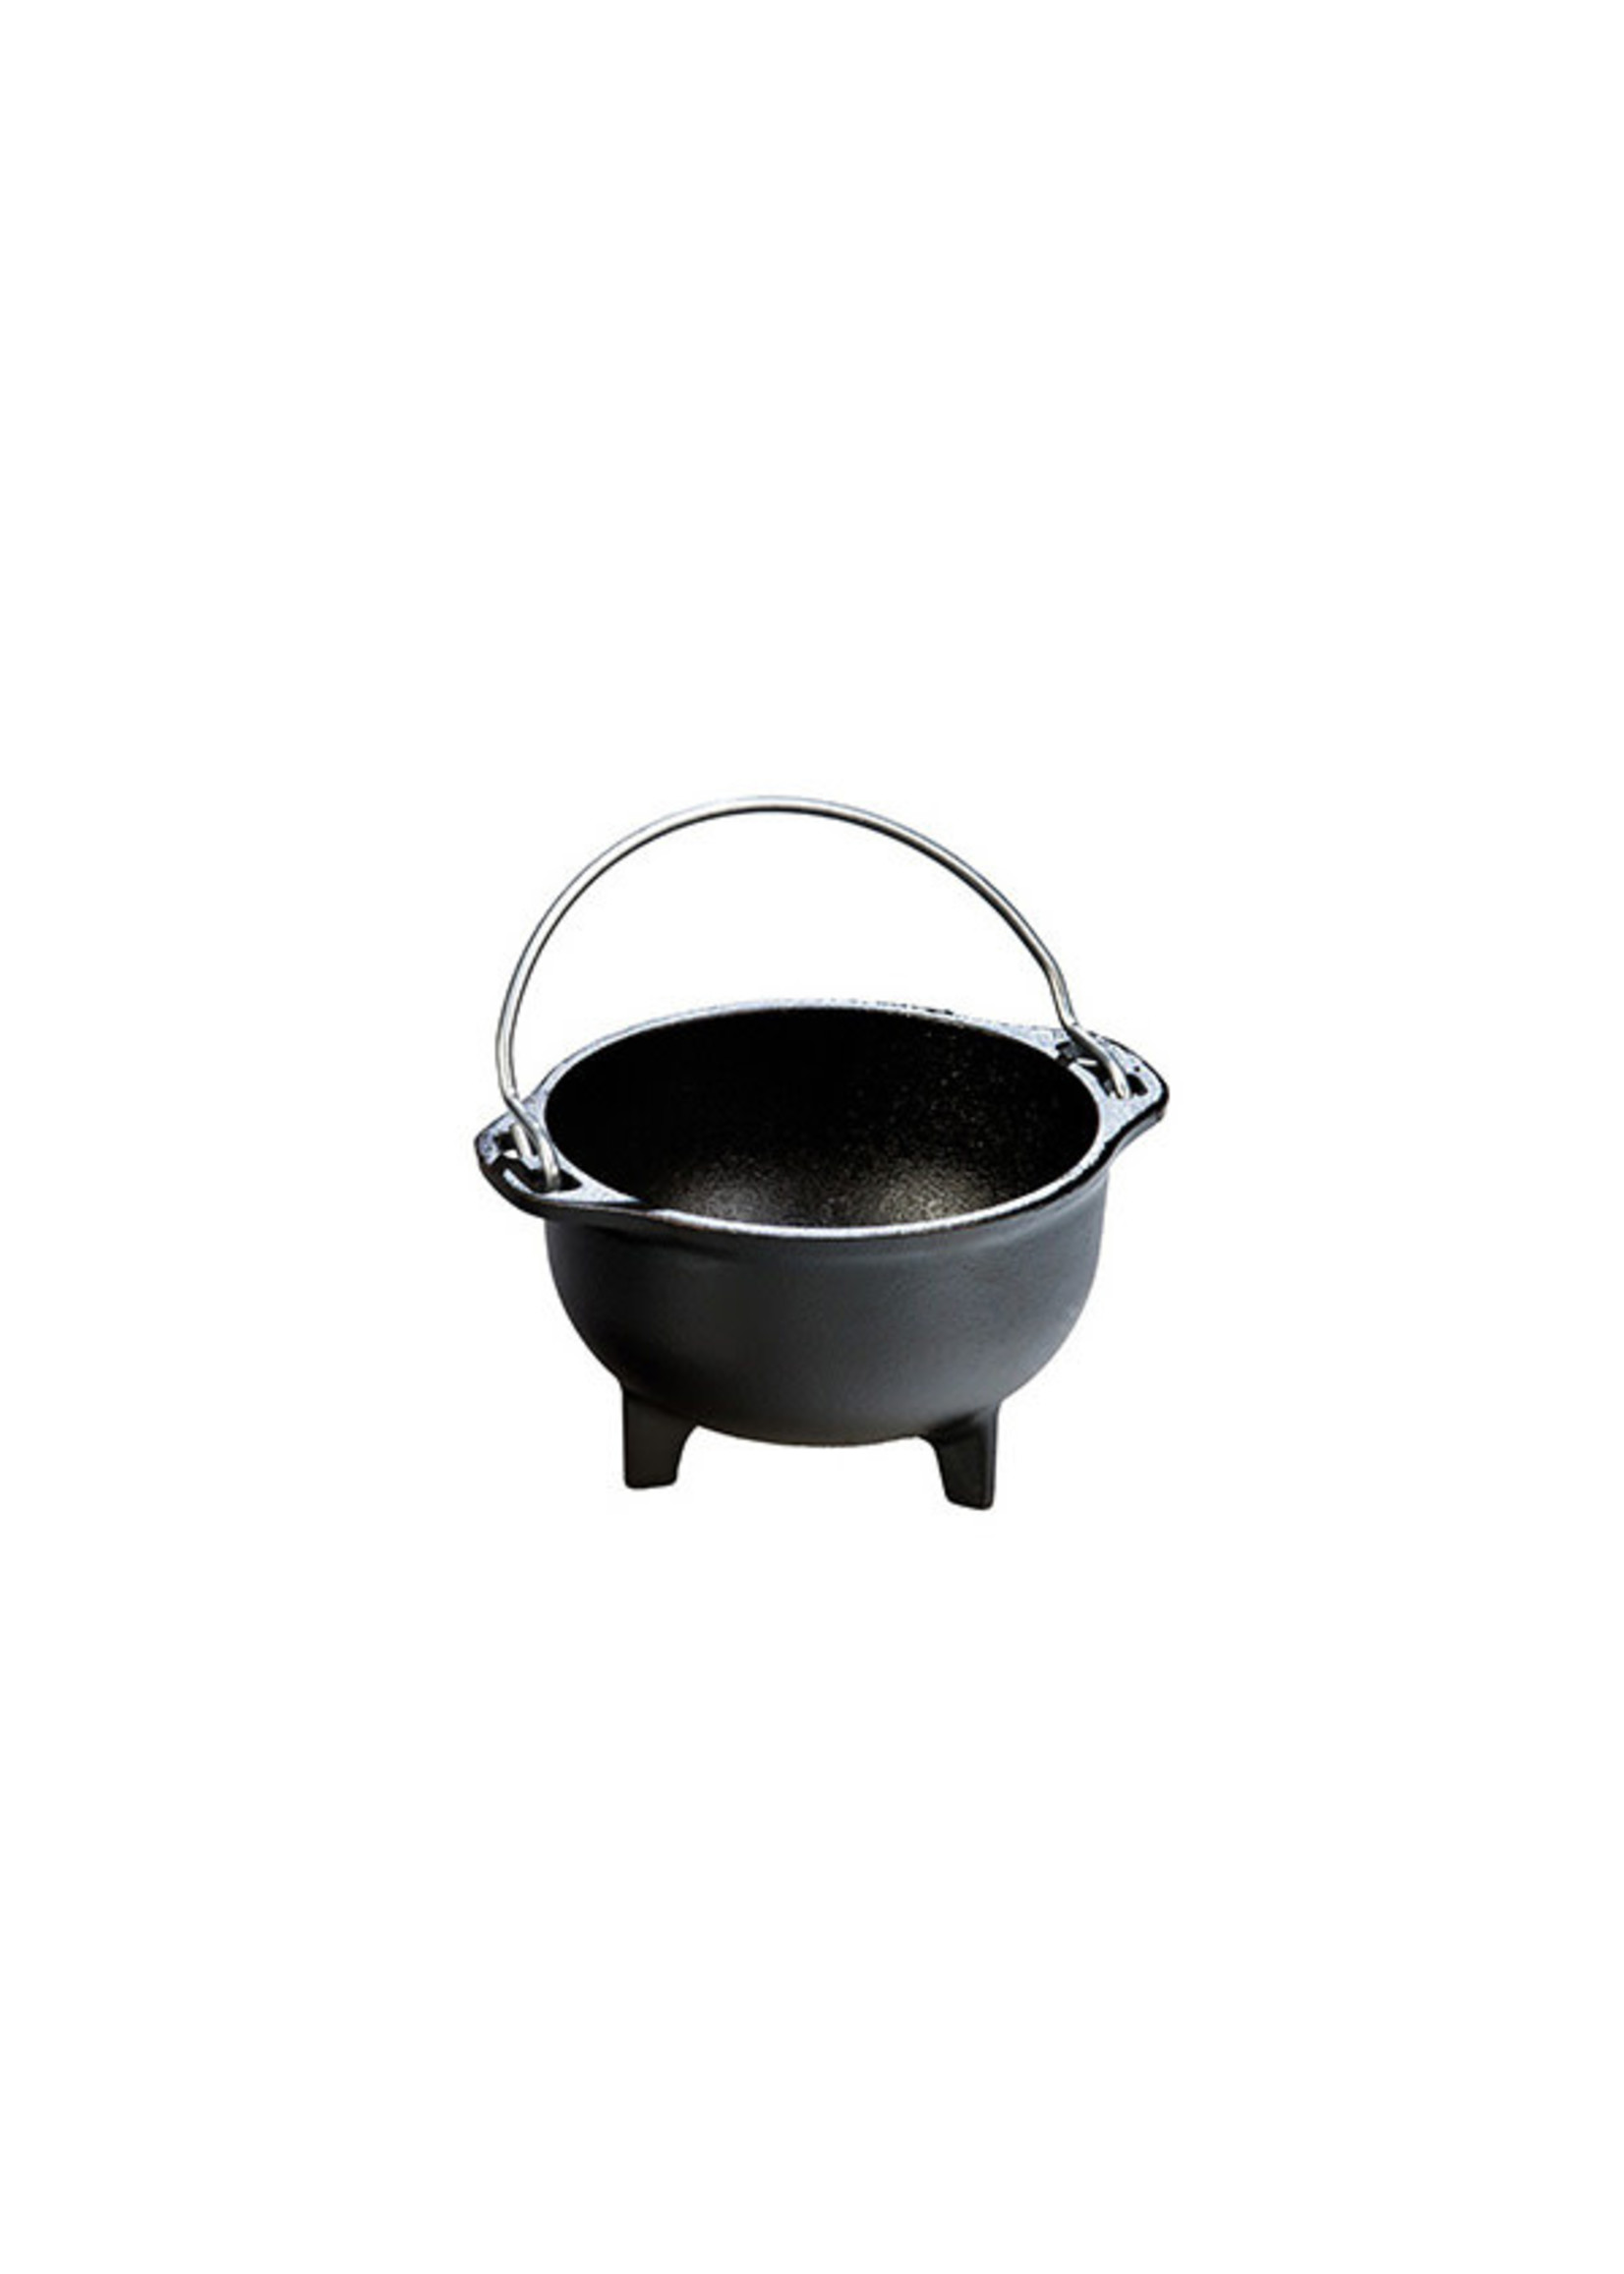 Lodge Cast Iron Country Kettle